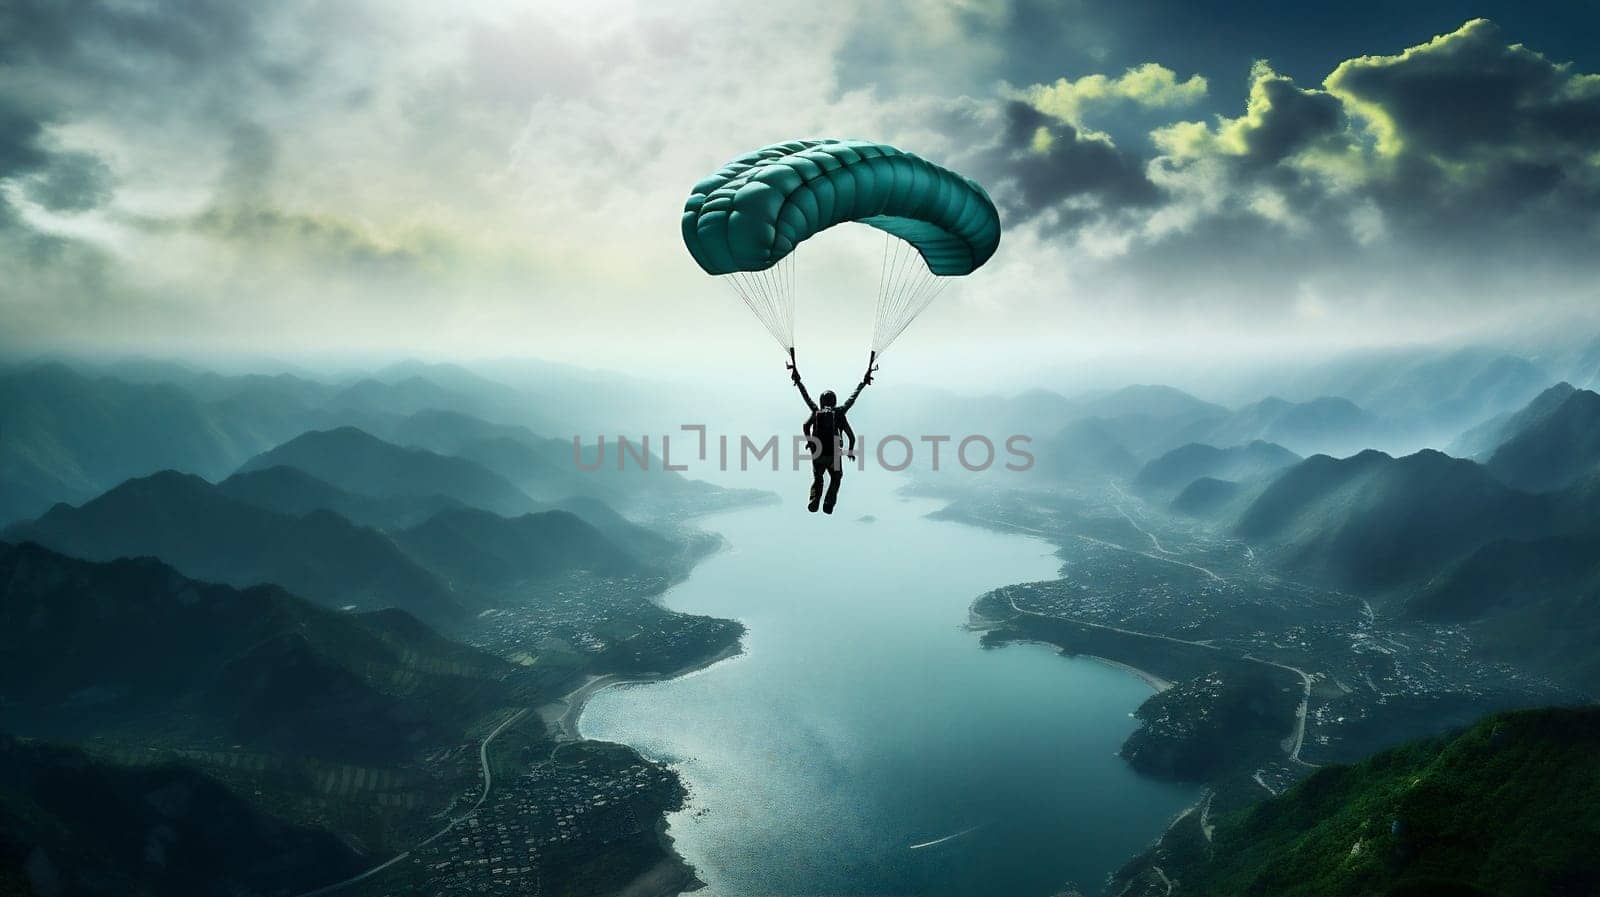 People sky paragliding adventure mountain sport extreme parachute blue flying by Vichizh